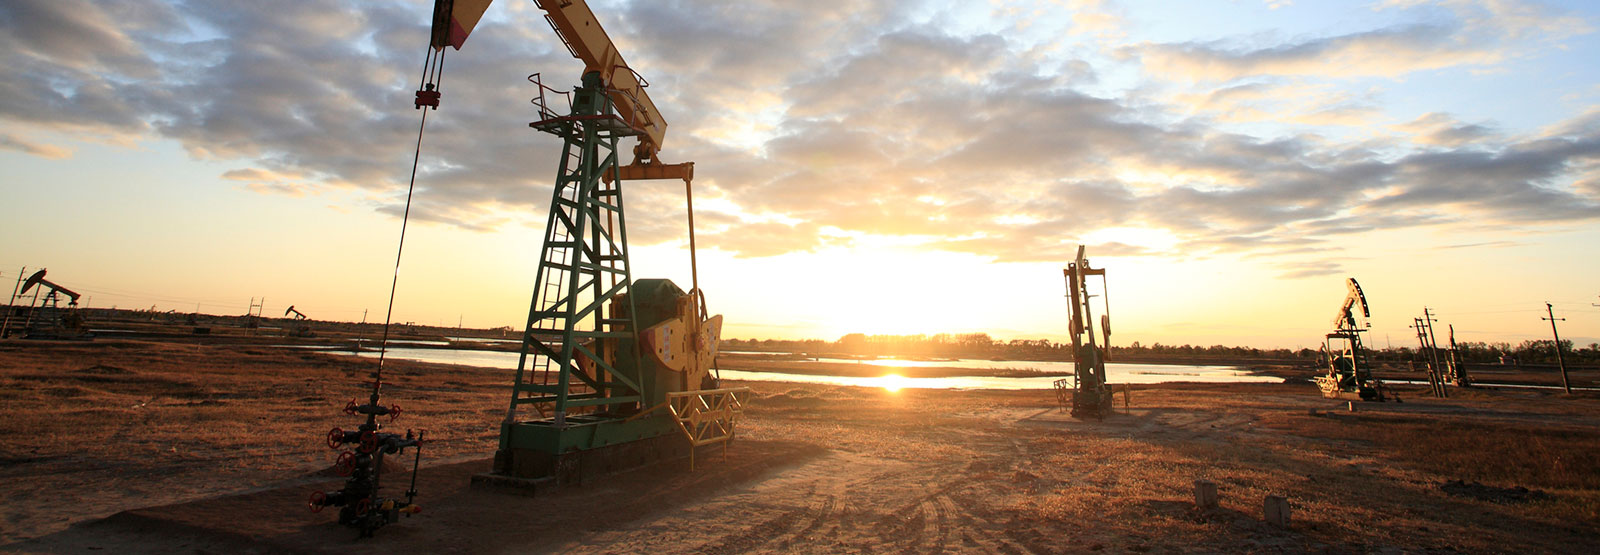 The Daqing Oil Field and machinery.